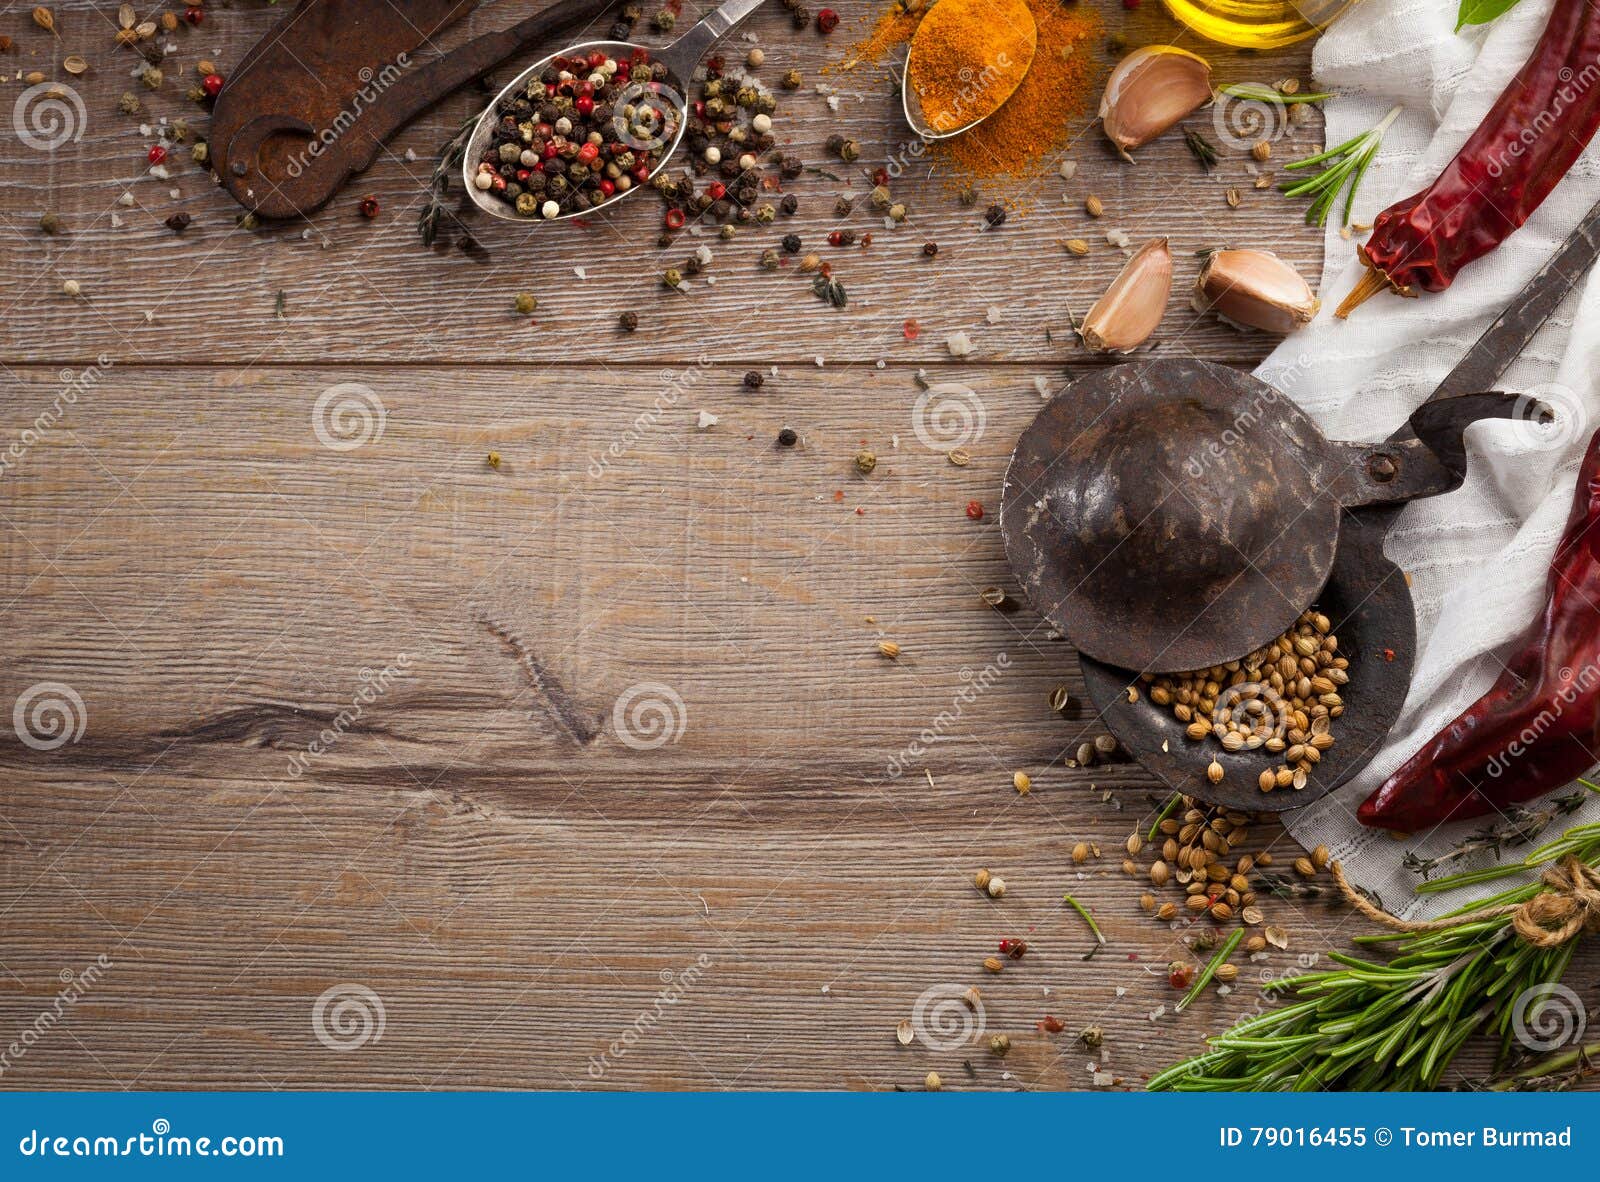 Herbs and Spices on Wood Table Stock Image - Image of herb, religion ...